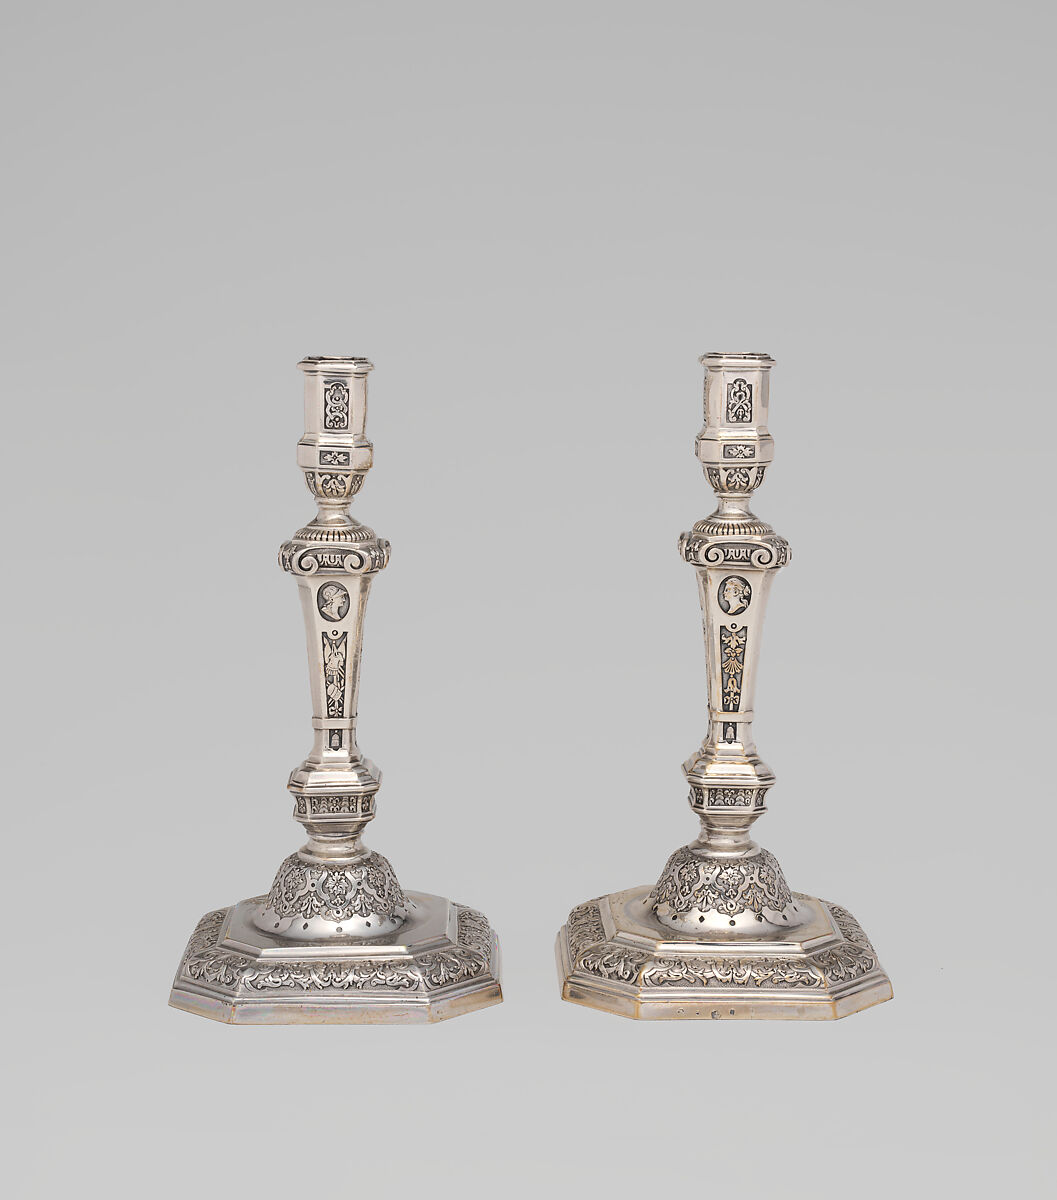 Pair of candlesticks, Jacques Demé (master in 1656), Silver, French, Paris 